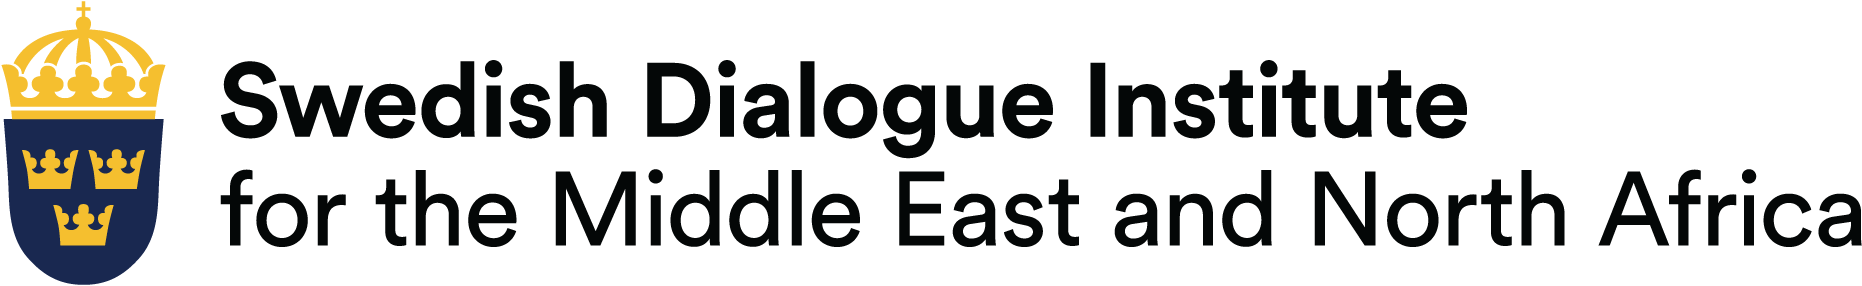 Swedish Dialogue Institute for the Middle East and North Africa